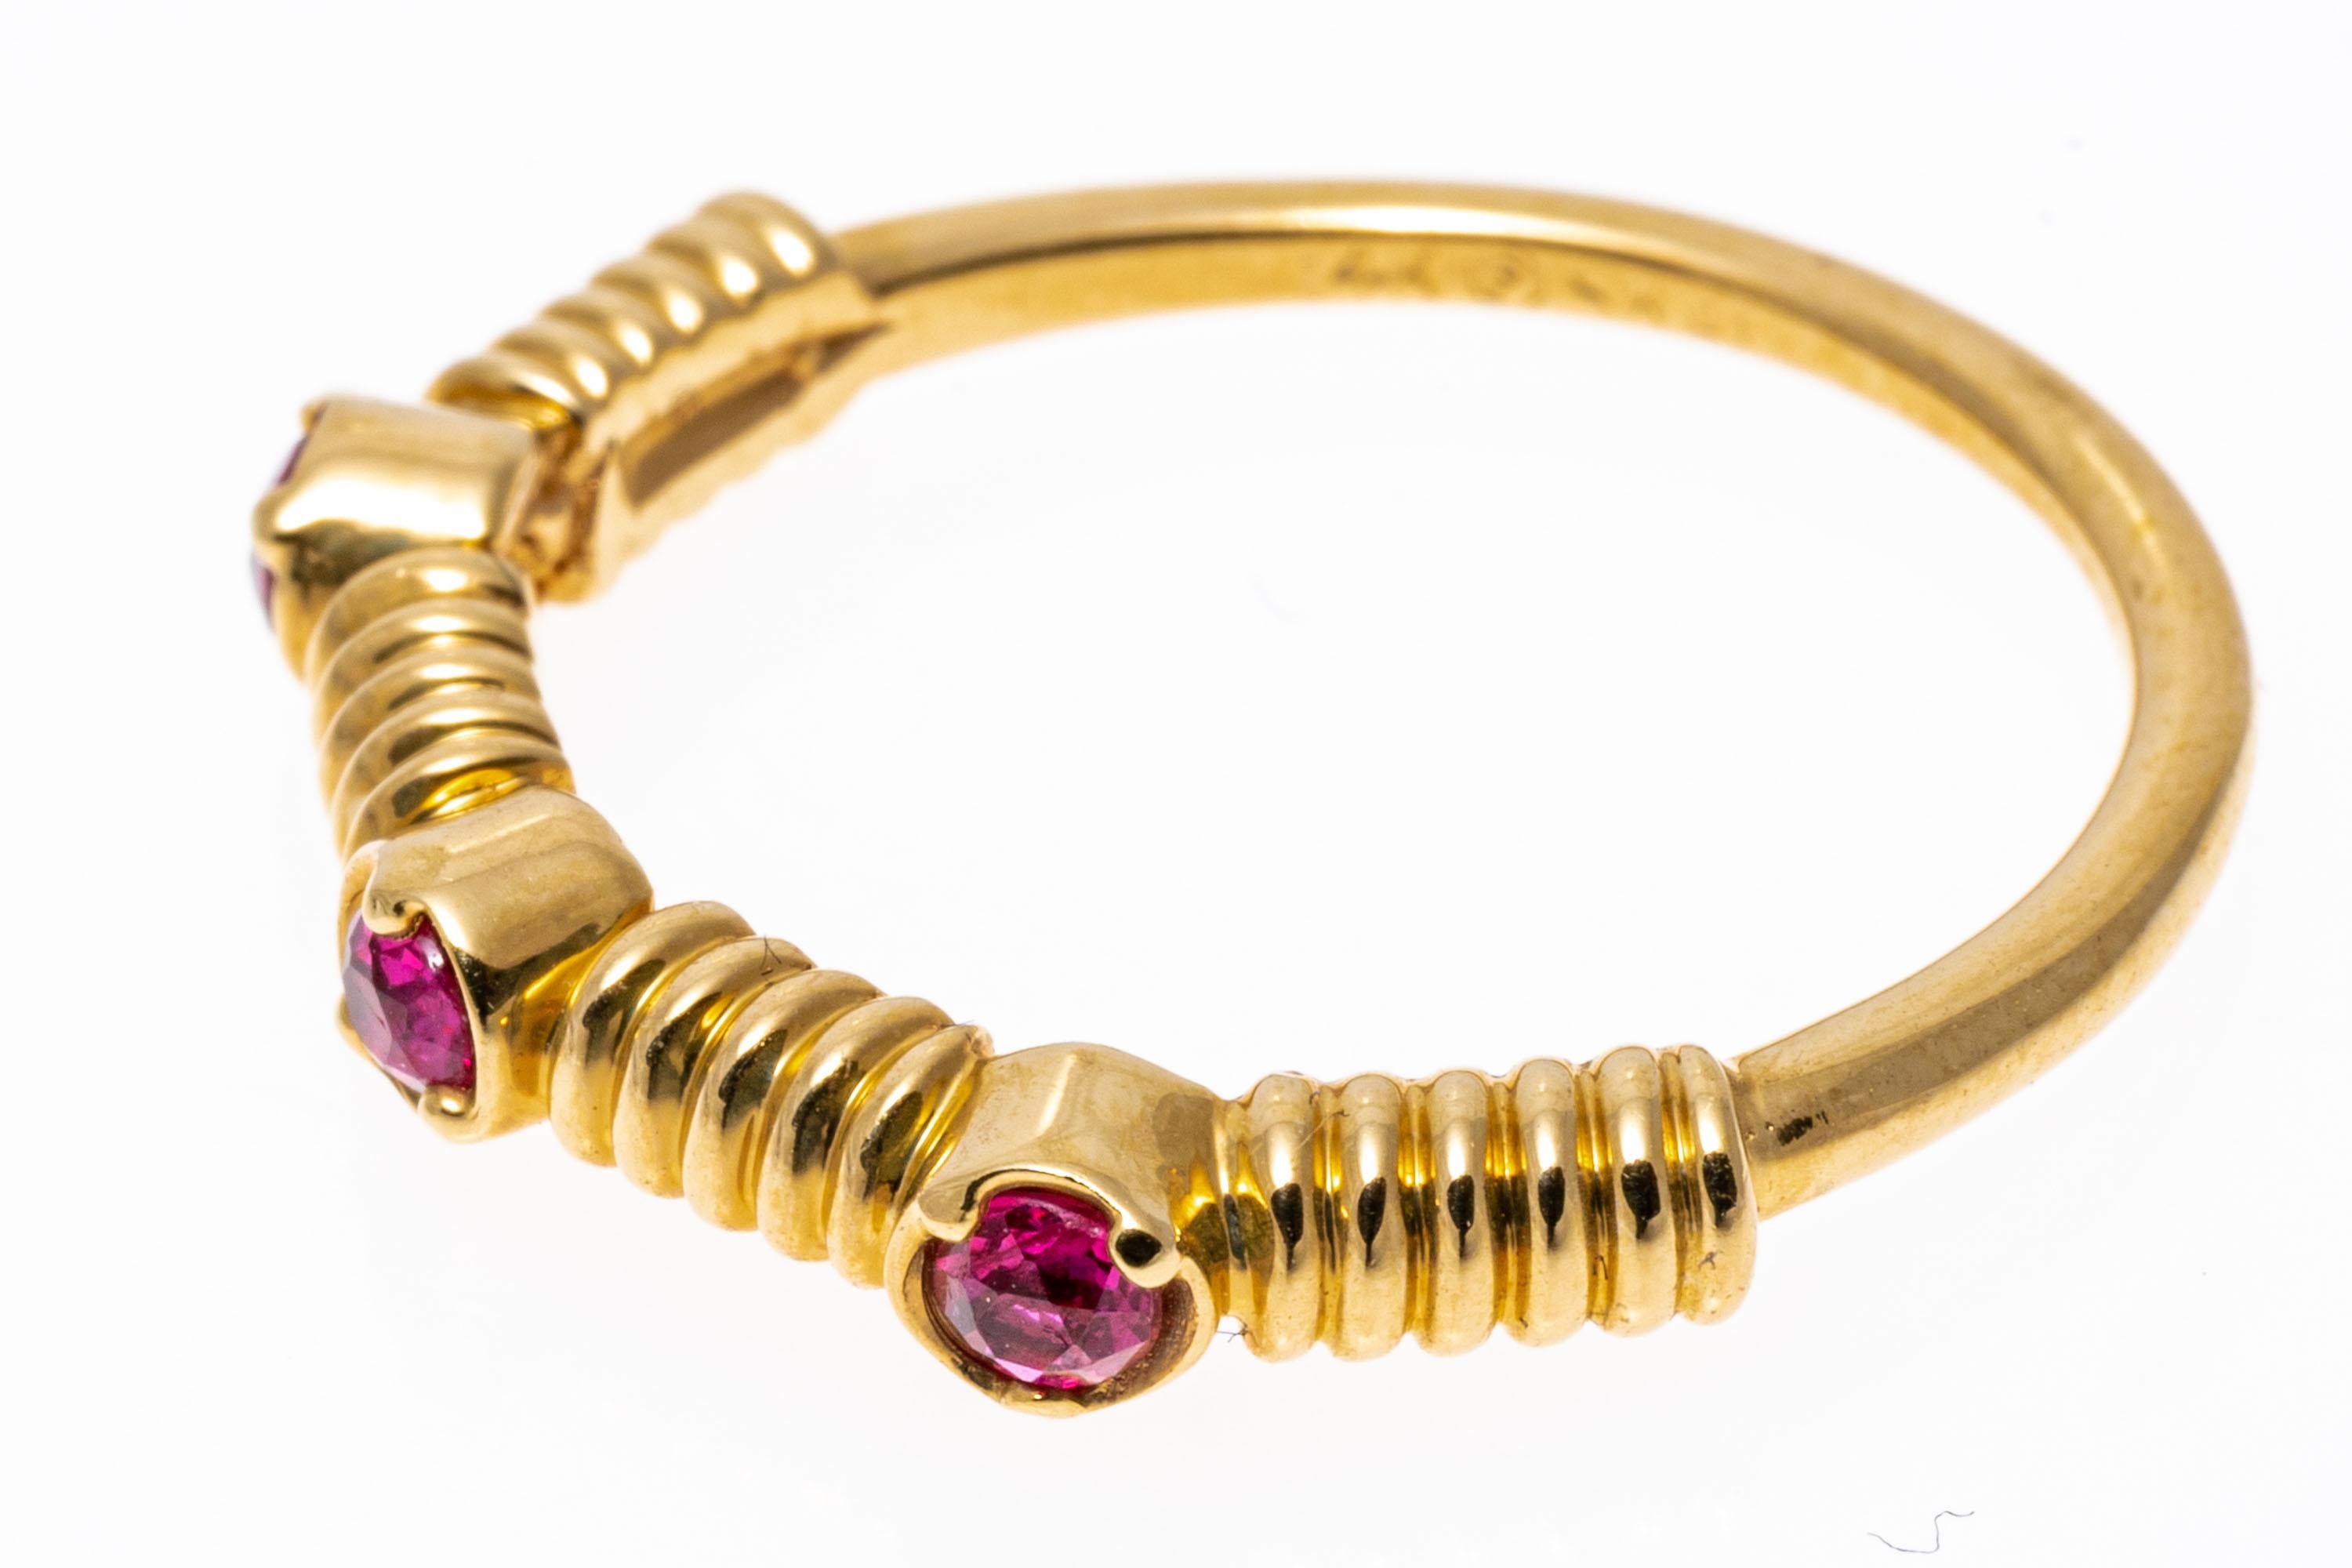 14k yellow gold ring. This fun ring is a contemporary ribbed band style ring, set with three round faceted, pinkish-red color rubies, approximately 0.27 TCW, prong set.
Marks: 14k 
Dimensions: 3/4